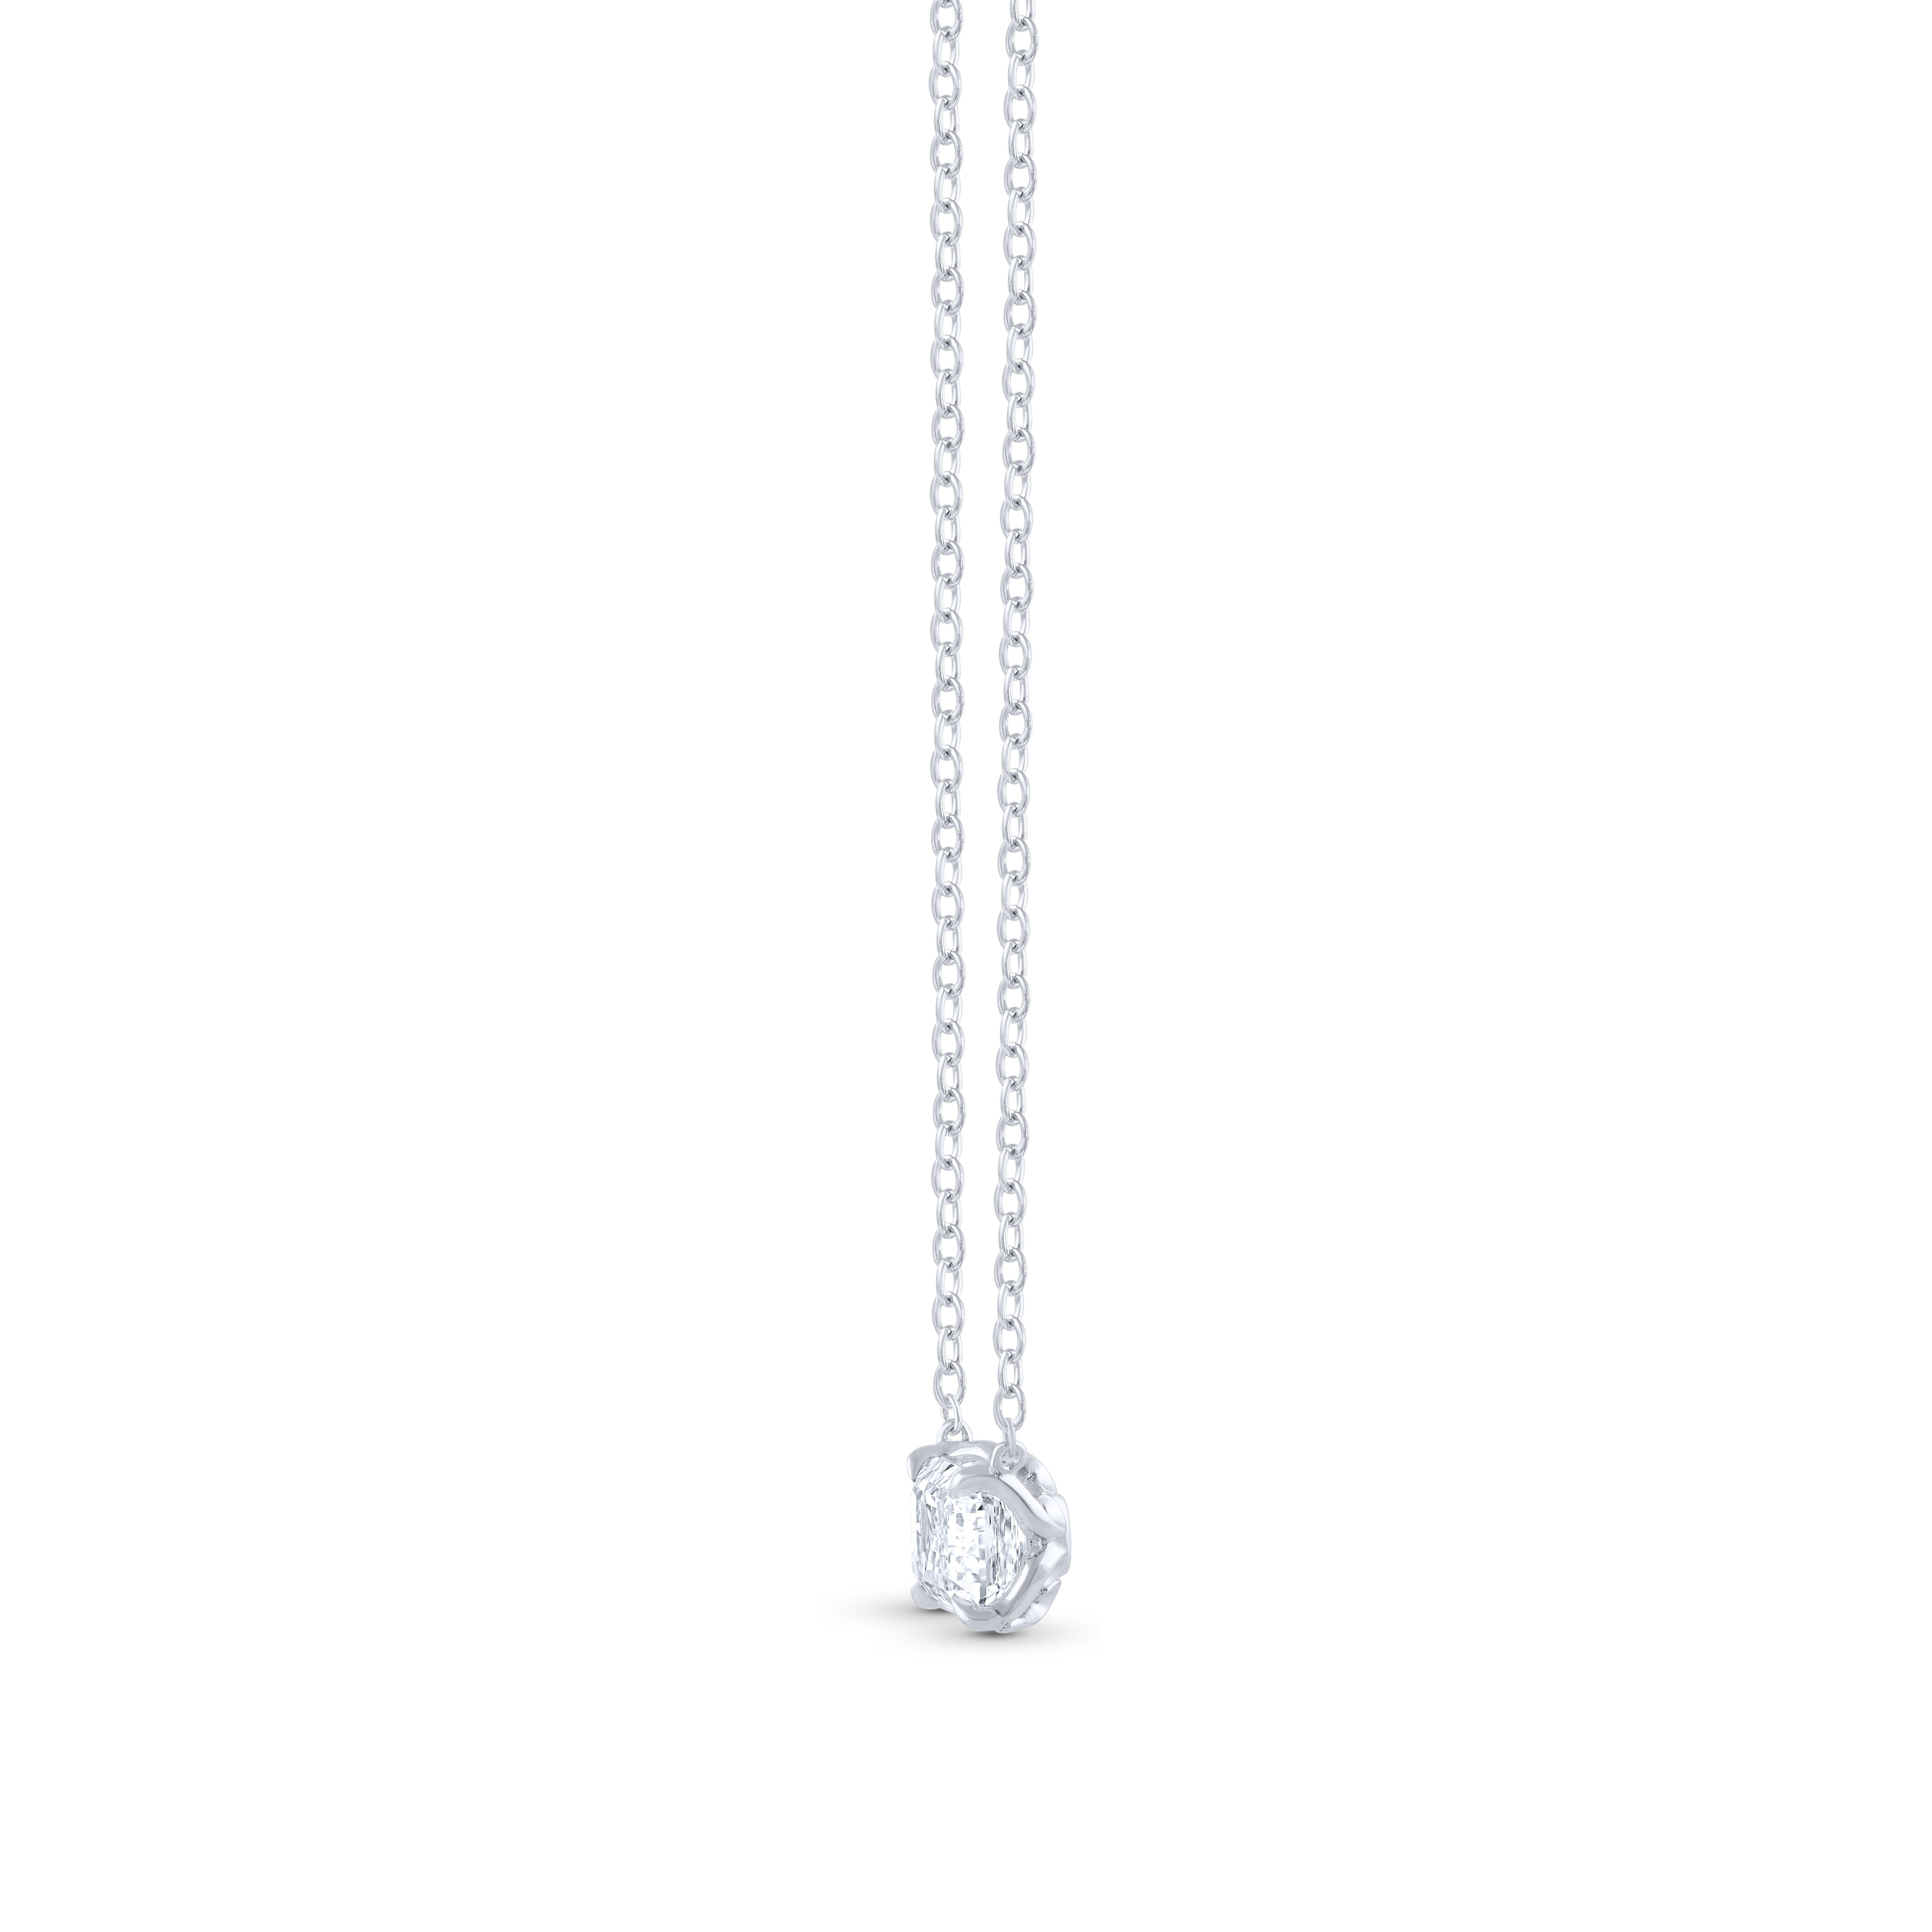  This solitaire diamond necklace features a single, emerald cut GIA certified 0.70 carat diamond in prong setting crafted in 18 KT white gold. This elegant necklace includes includes 18-inch cable chain with extender at 16-inch.  

Color - D